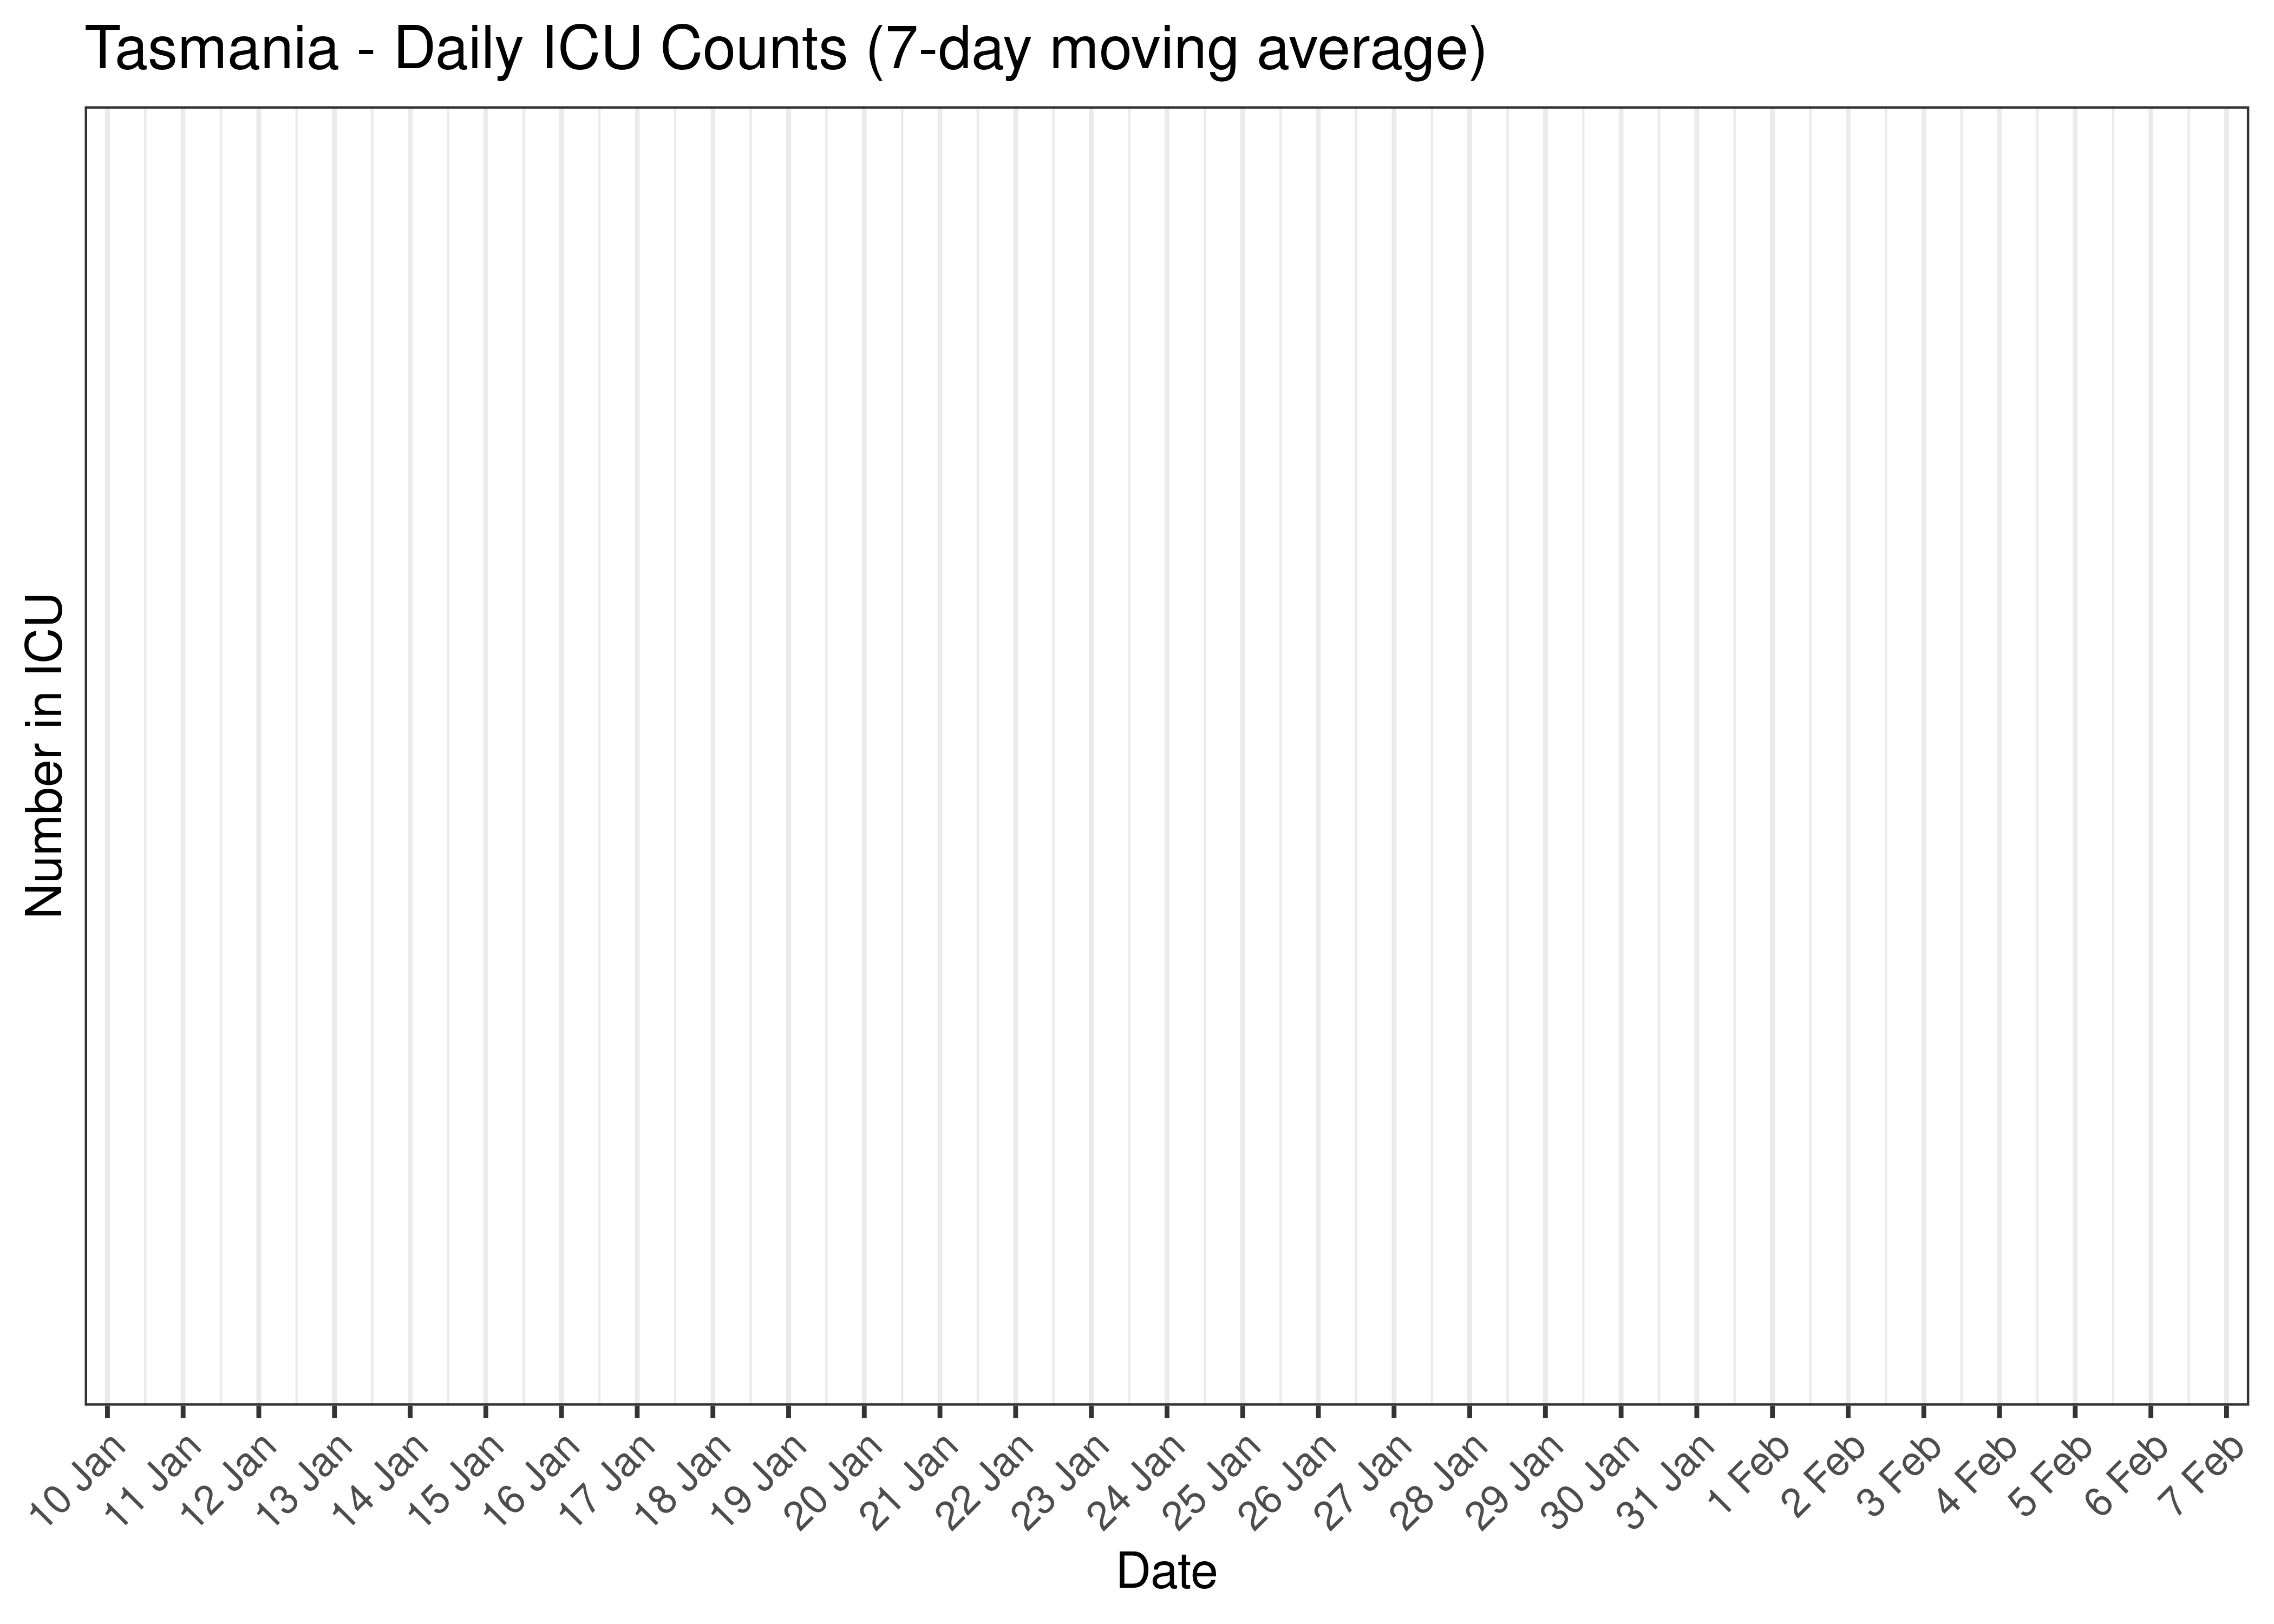 Tasmania - Daily ICU Counts for Last 30-days (7-day moving average)